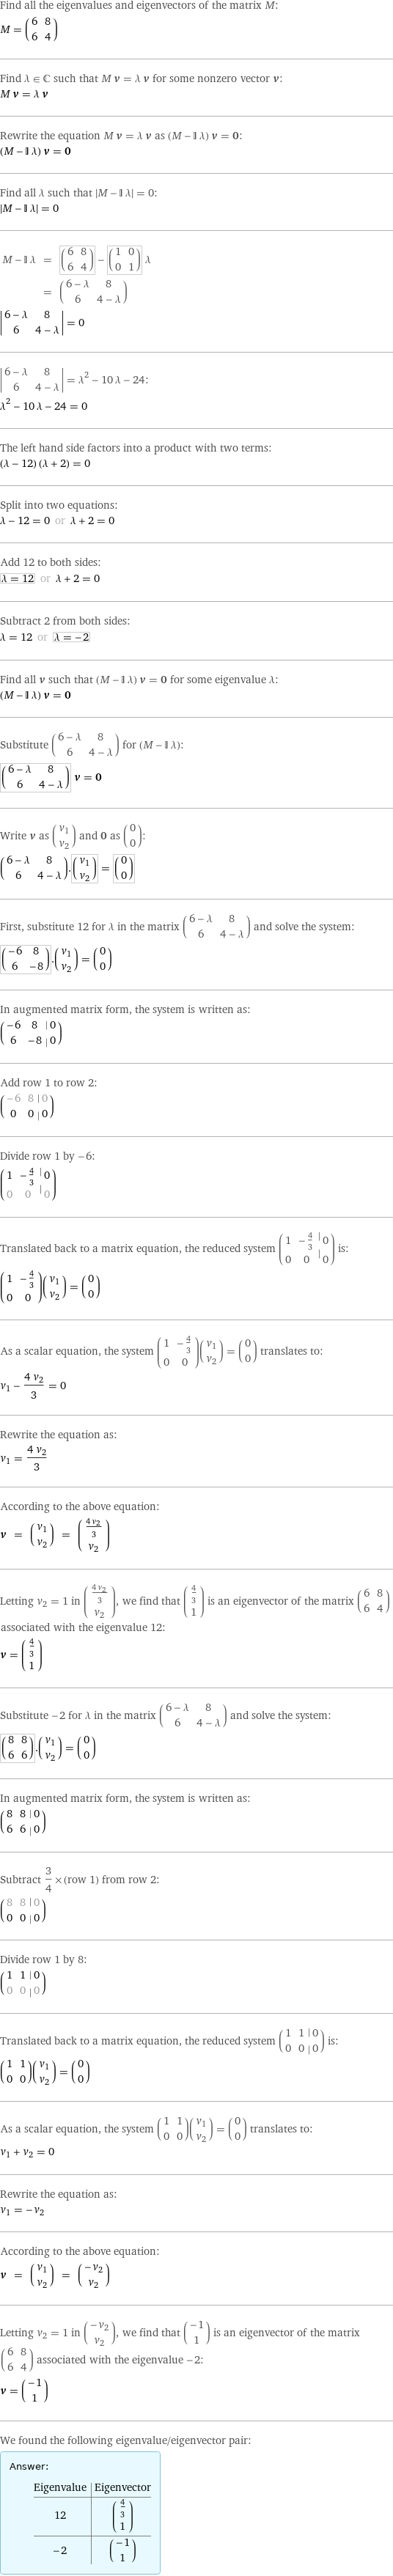 Find all the eigenvalues and eigenvectors of the matrix M: M = (6 | 8 6 | 4) Find λ element C such that M v = λ v for some nonzero vector v: M v = λ v Rewrite the equation M v = λ v as (M - I λ) v = 0: (M - I λ) v = 0 Find all λ such that left bracketing bar M - I λ right bracketing bar = 0:  left bracketing bar M - I λ right bracketing bar = 0 M - I λ | = | (6 | 8 6 | 4) - (1 | 0 0 | 1) λ  | = | (6 - λ | 8 6 | 4 - λ) invisible comma   left bracketing bar 6 - λ | 8 6 | 4 - λ right bracketing bar = 0  left bracketing bar 6 - λ | 8 6 | 4 - λ right bracketing bar = λ^2 - 10 λ - 24: λ^2 - 10 λ - 24 = 0 The left hand side factors into a product with two terms: (λ - 12) (λ + 2) = 0 Split into two equations: λ - 12 = 0 or λ + 2 = 0 Add 12 to both sides: λ = 12 or λ + 2 = 0 Subtract 2 from both sides: λ = 12 or λ = -2 Find all v such that (M - I λ) v = 0 for some eigenvalue λ: (M - I λ) v = 0 Substitute (6 - λ | 8 6 | 4 - λ) for (M - I λ): (6 - λ | 8 6 | 4 - λ) v = 0 Write v as (v_1 v_2) and 0 as (0 0): (6 - λ | 8 6 | 4 - λ).(v_1 v_2) = (0 0) First, substitute 12 for λ in the matrix (6 - λ | 8 6 | 4 - λ) and solve the system: (-6 | 8 6 | -8).(v_1 v_2) = (0 0) In augmented matrix form, the system is written as: (-6 | 8 | 0 6 | -8 | 0) Add row 1 to row 2: (-6 | 8 | 0 0 | 0 | 0) Divide row 1 by -6: (1 | -4/3 | 0 0 | 0 | 0) Translated back to a matrix equation, the reduced system (1 | -4/3 | 0 0 | 0 | 0) is: (1 | -4/3 0 | 0)(v_1 v_2) = (0 0) As a scalar equation, the system (1 | -4/3 0 | 0)(v_1 v_2) = (0 0) translates to: v_1 - (4 v_2)/3 = 0 Rewrite the equation as: v_1 = (4 v_2)/3 According to the above equation: v = (v_1 v_2) = ((4 v_2)/3 v_2) Letting v_2 = 1 in ((4 v_2)/3 v_2), we find that (4/3 1) is an eigenvector of the matrix (6 | 8 6 | 4) associated with the eigenvalue 12: v = (4/3 1) Substitute -2 for λ in the matrix (6 - λ | 8 6 | 4 - λ) and solve the system: (8 | 8 6 | 6).(v_1 v_2) = (0 0) In augmented matrix form, the system is written as: (8 | 8 | 0 6 | 6 | 0) Subtract 3/4 × (row 1) from row 2: (8 | 8 | 0 0 | 0 | 0) Divide row 1 by 8: (1 | 1 | 0 0 | 0 | 0) Translated back to a matrix equation, the reduced system (1 | 1 | 0 0 | 0 | 0) is: (1 | 1 0 | 0)(v_1 v_2) = (0 0) As a scalar equation, the system (1 | 1 0 | 0)(v_1 v_2) = (0 0) translates to: v_1 + v_2 = 0 Rewrite the equation as: v_1 = -v_2 According to the above equation: v = (v_1 v_2) = (-v_2 v_2) Letting v_2 = 1 in (-v_2 v_2), we find that (-1 1) is an eigenvector of the matrix (6 | 8 6 | 4) associated with the eigenvalue -2: v = (-1 1) We found the following eigenvalue/eigenvector pair: Answer: |   | Eigenvalue | Eigenvector 12 | (4/3 1) -2 | (-1 1)